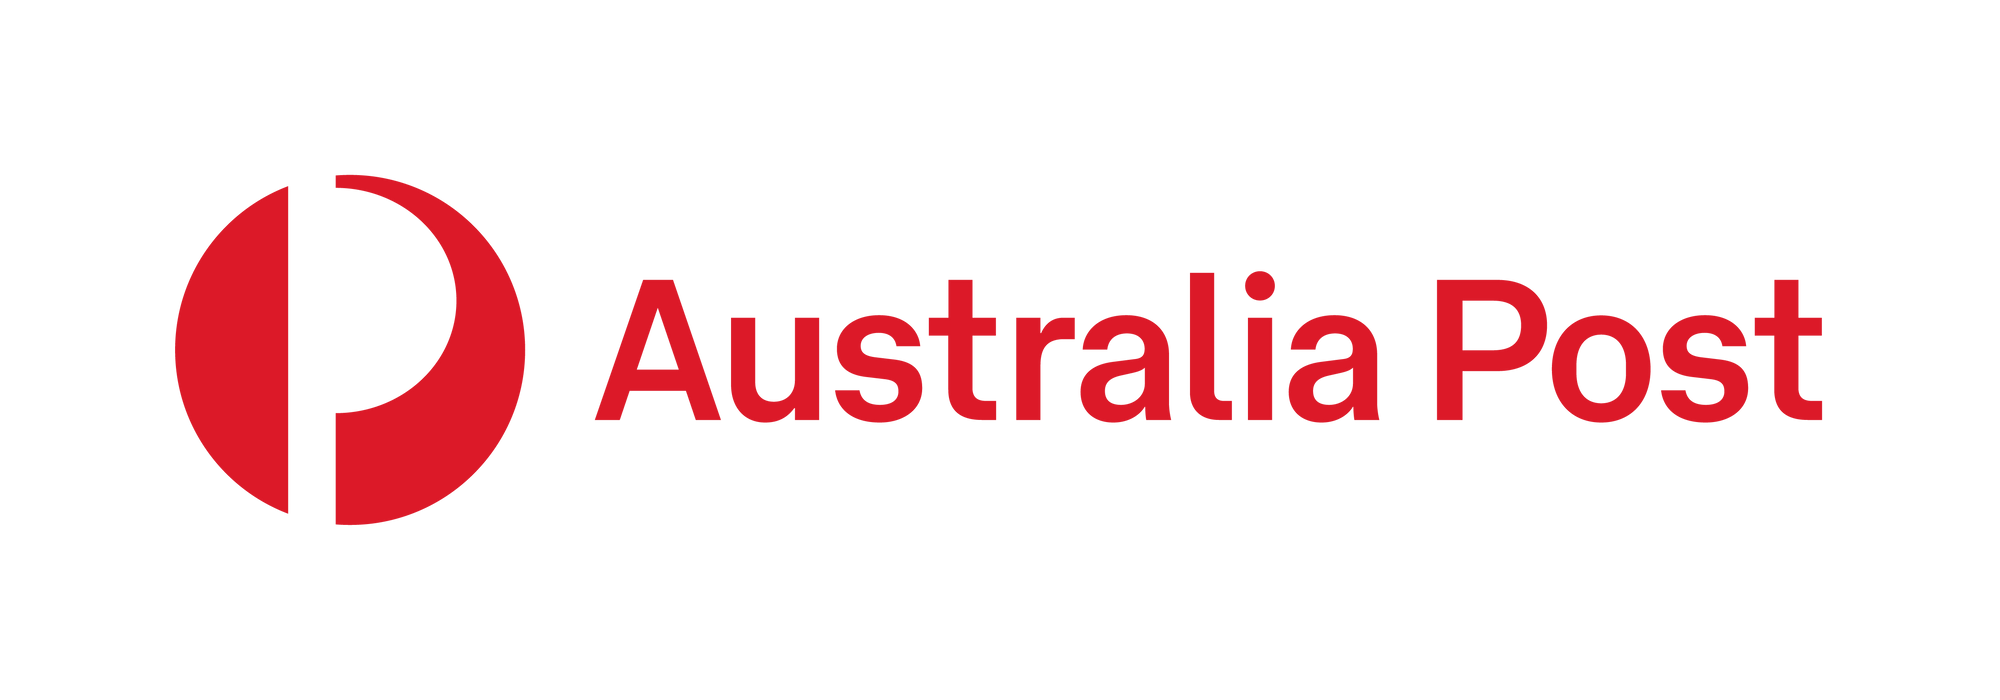 $6.00 Exprress Post Shipping - Australia Post Shipping Update September '21